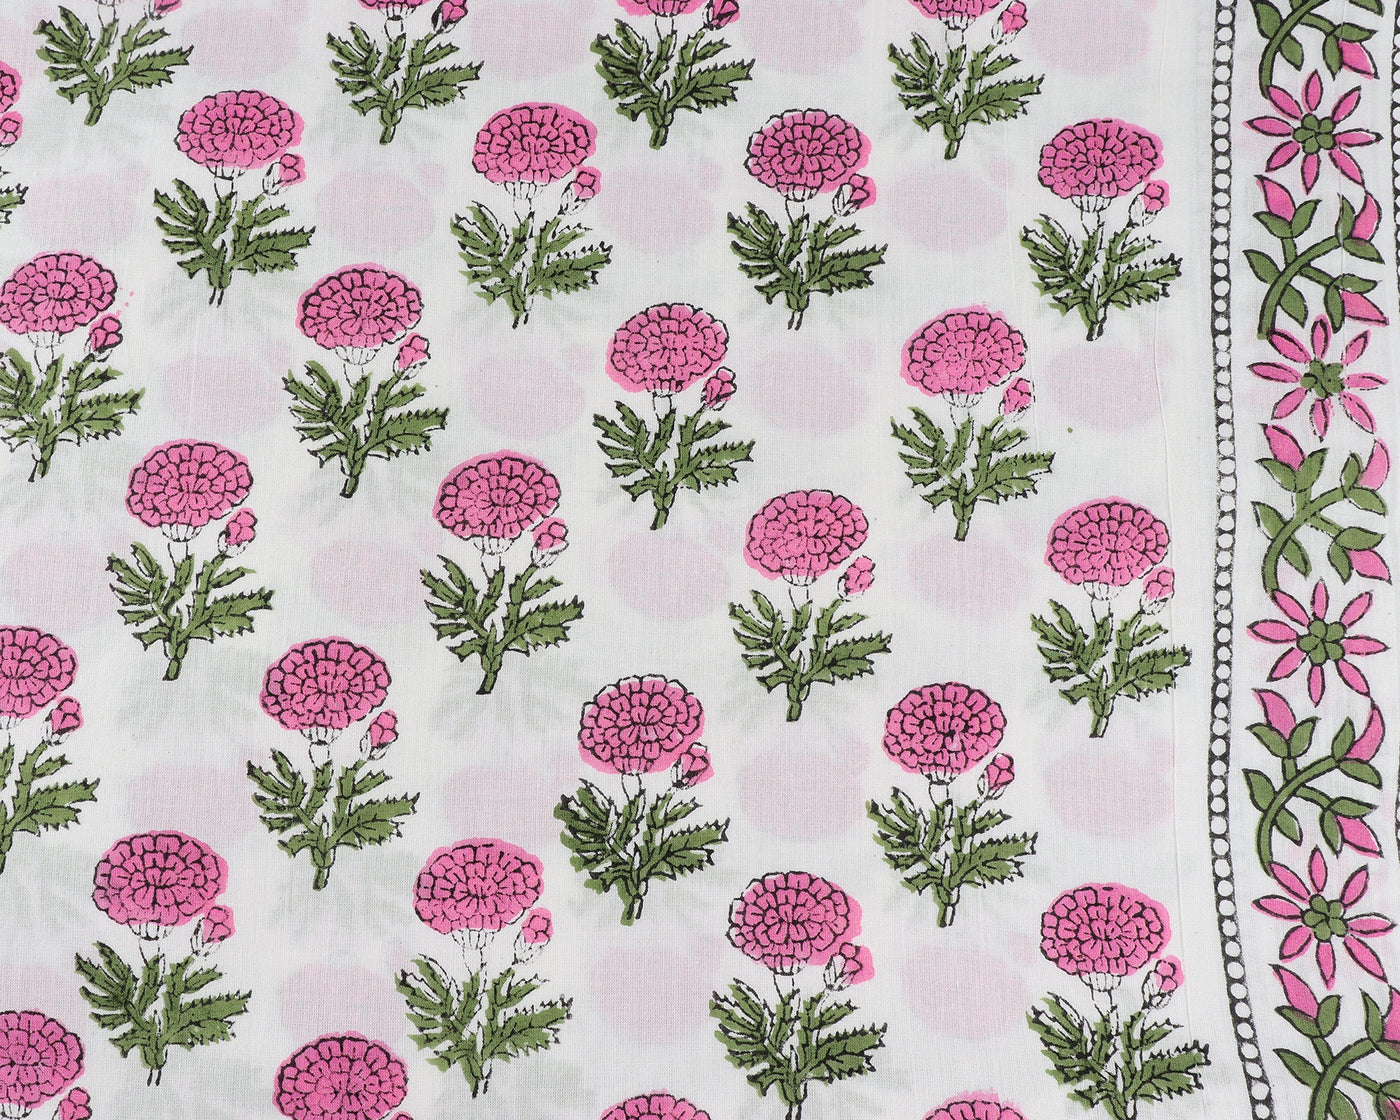 Thulian Pink, Fern Green Indian Floral Hand Block Printed 100% Pure Cotton Cloth, Fabric by the Yard, Women's Clothing Curtains Duvet Covers